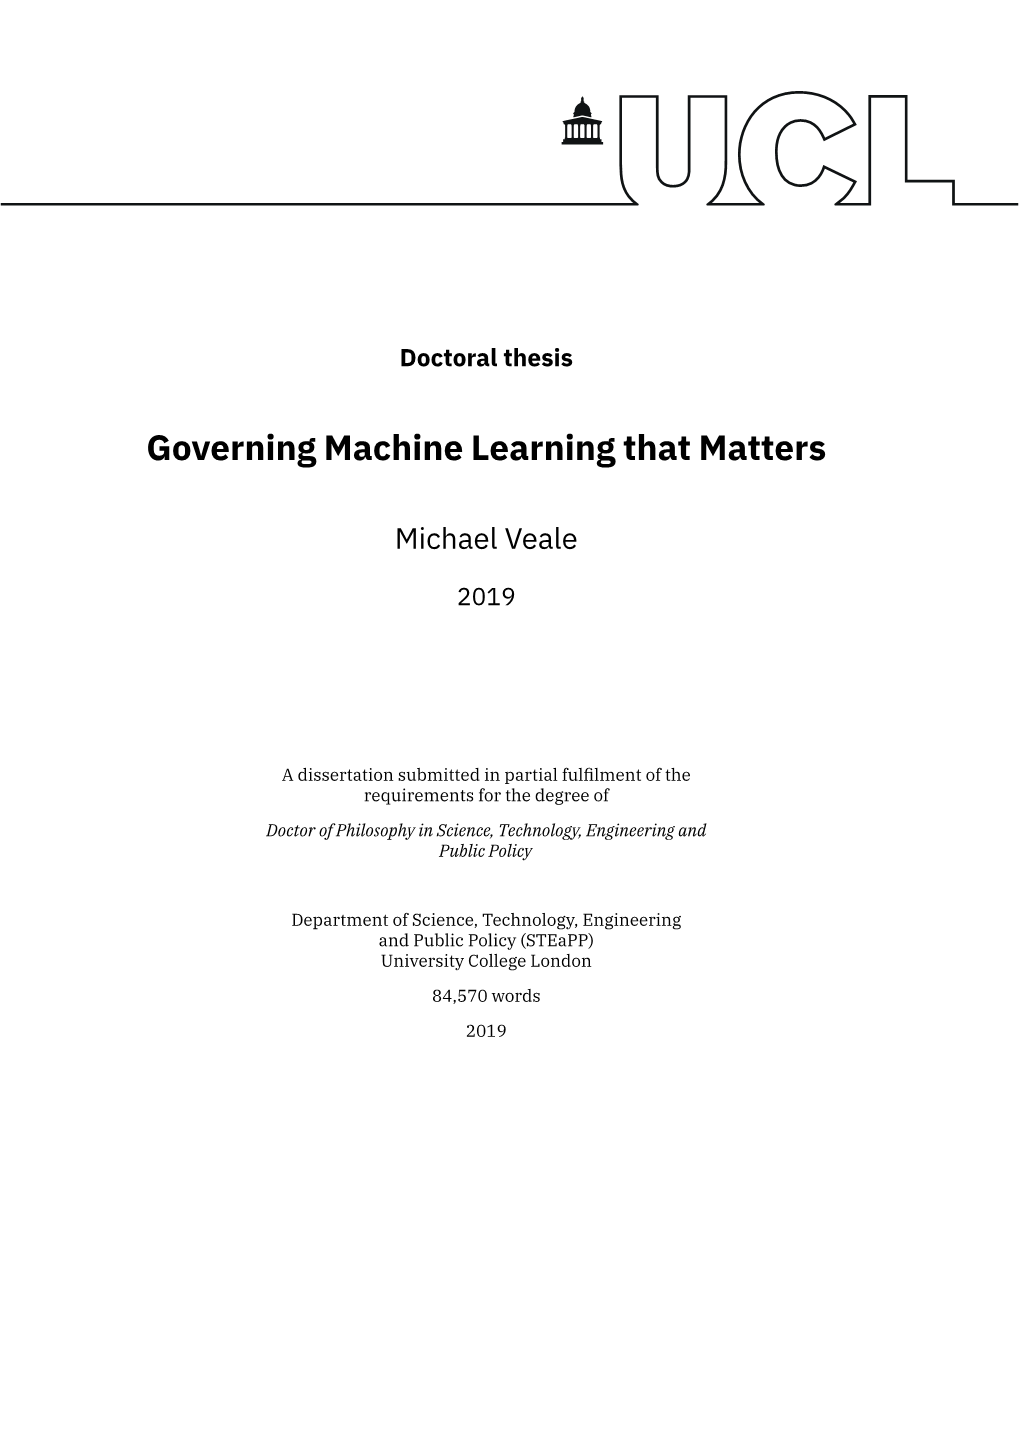 Governing Machine Learning That Matters